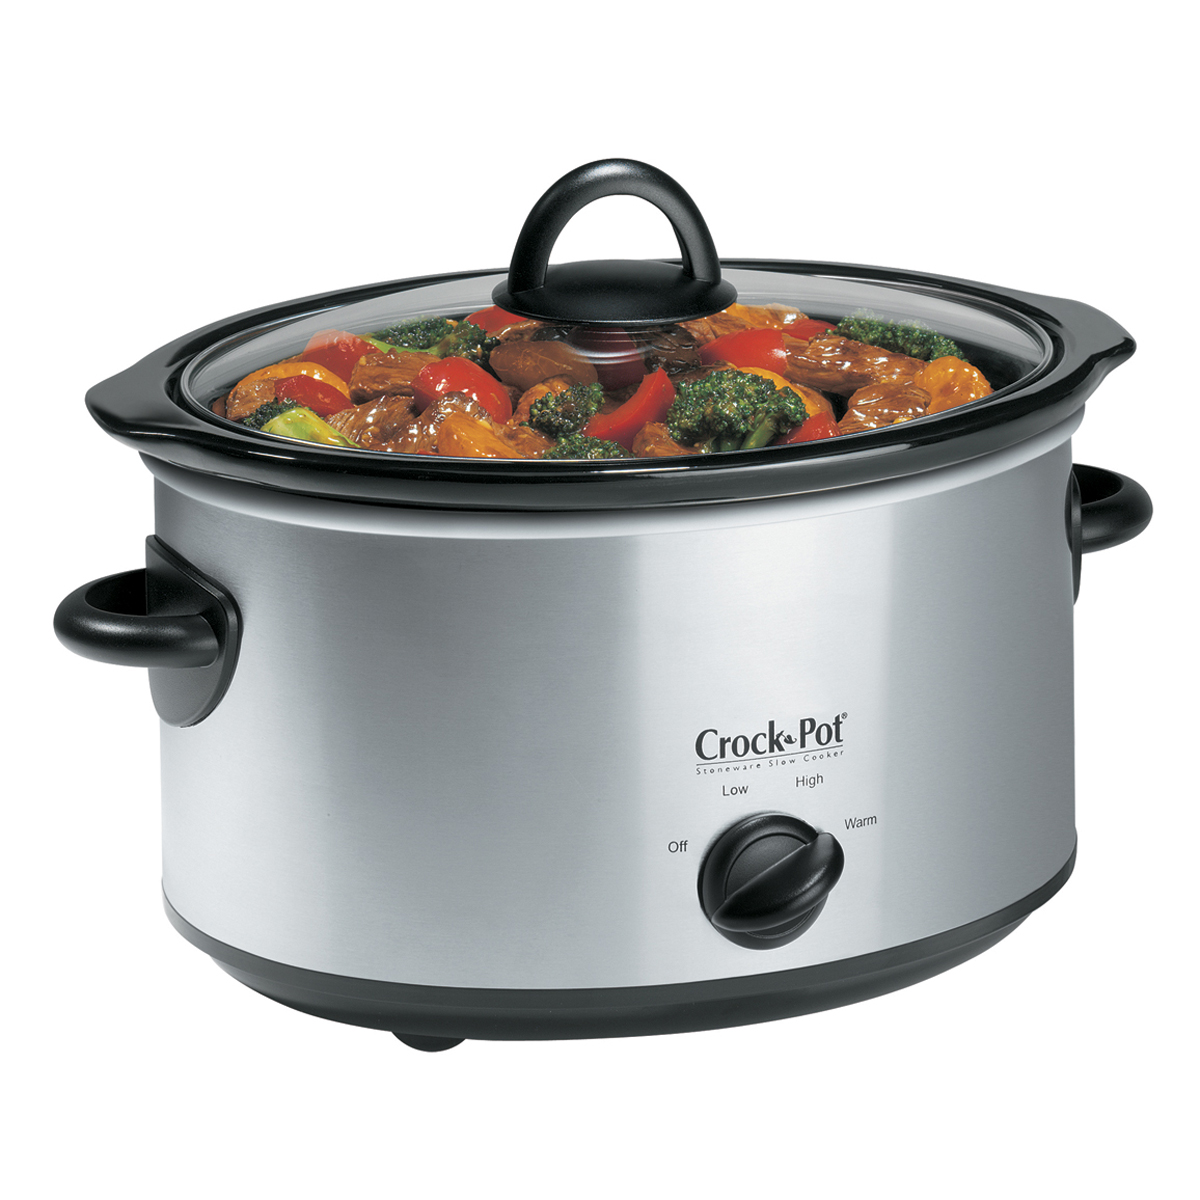 Crock-Pot® 4Qt. Oval Manual Slow Cooker, Stainless